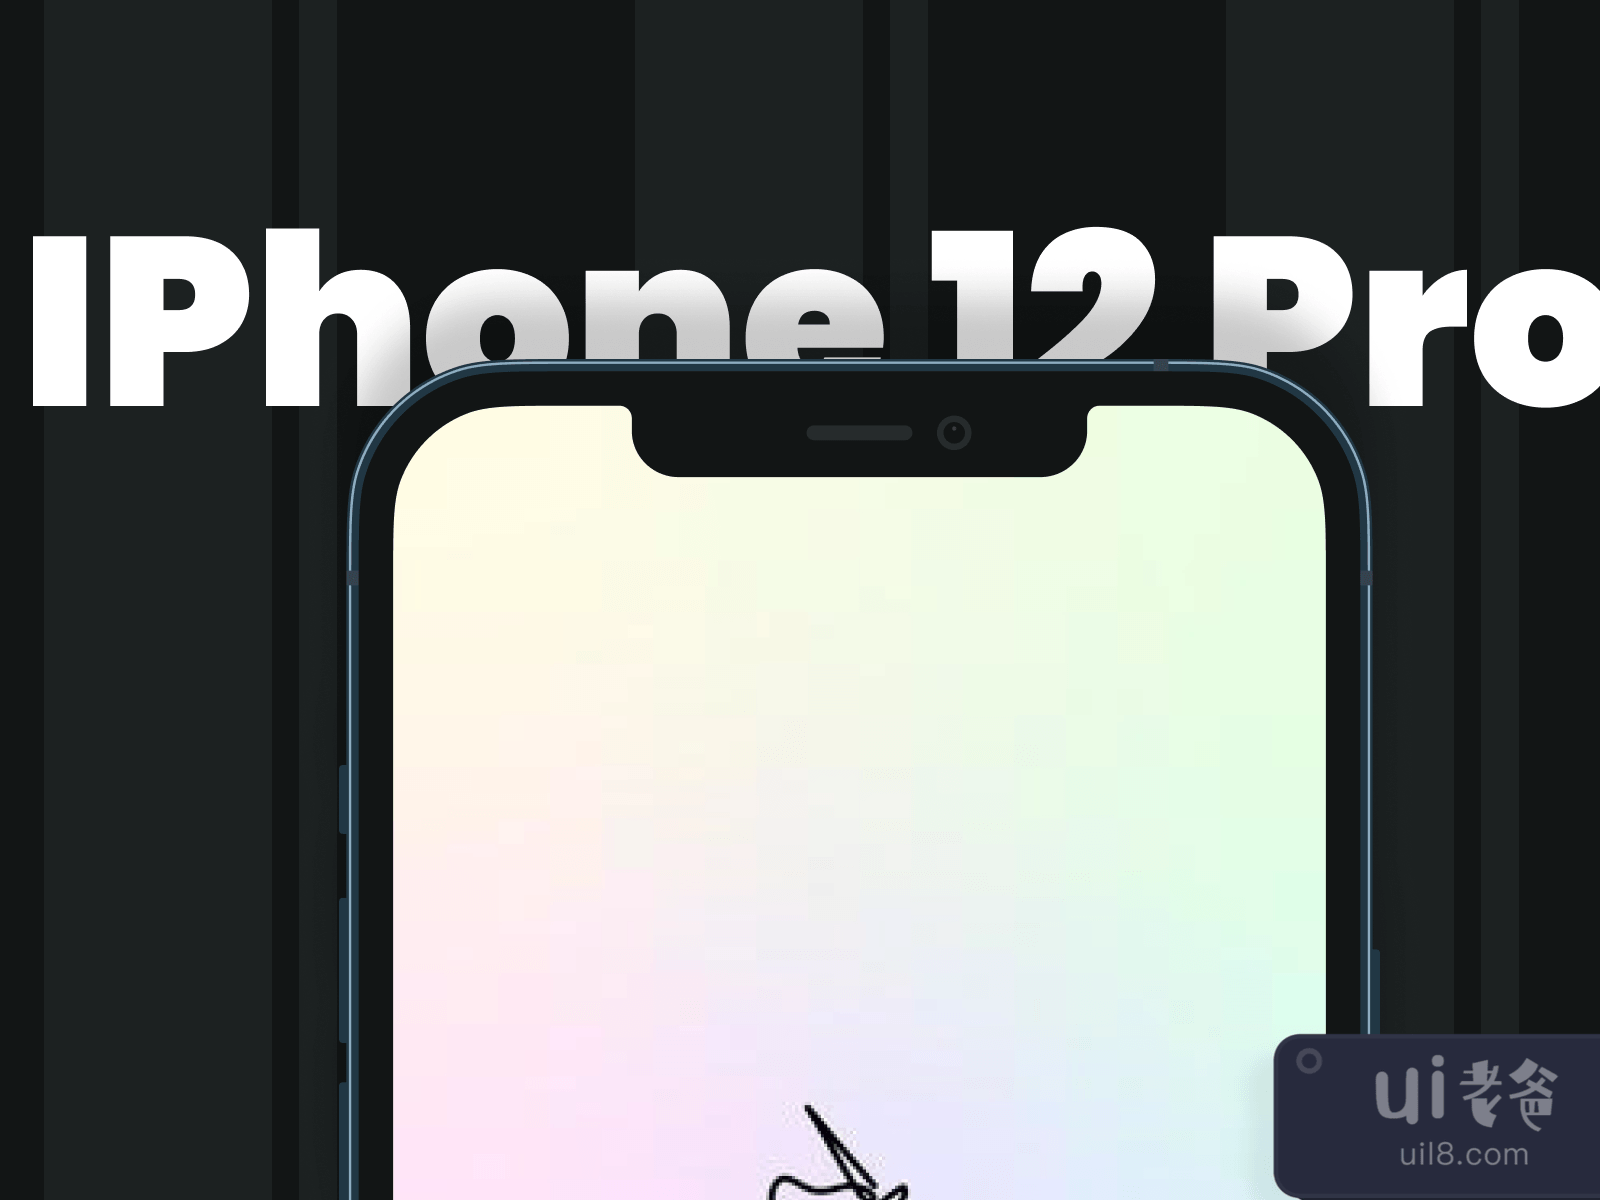 iPhone 12 Pro Max Flat Mockup for Figma and Adobe XD No 2